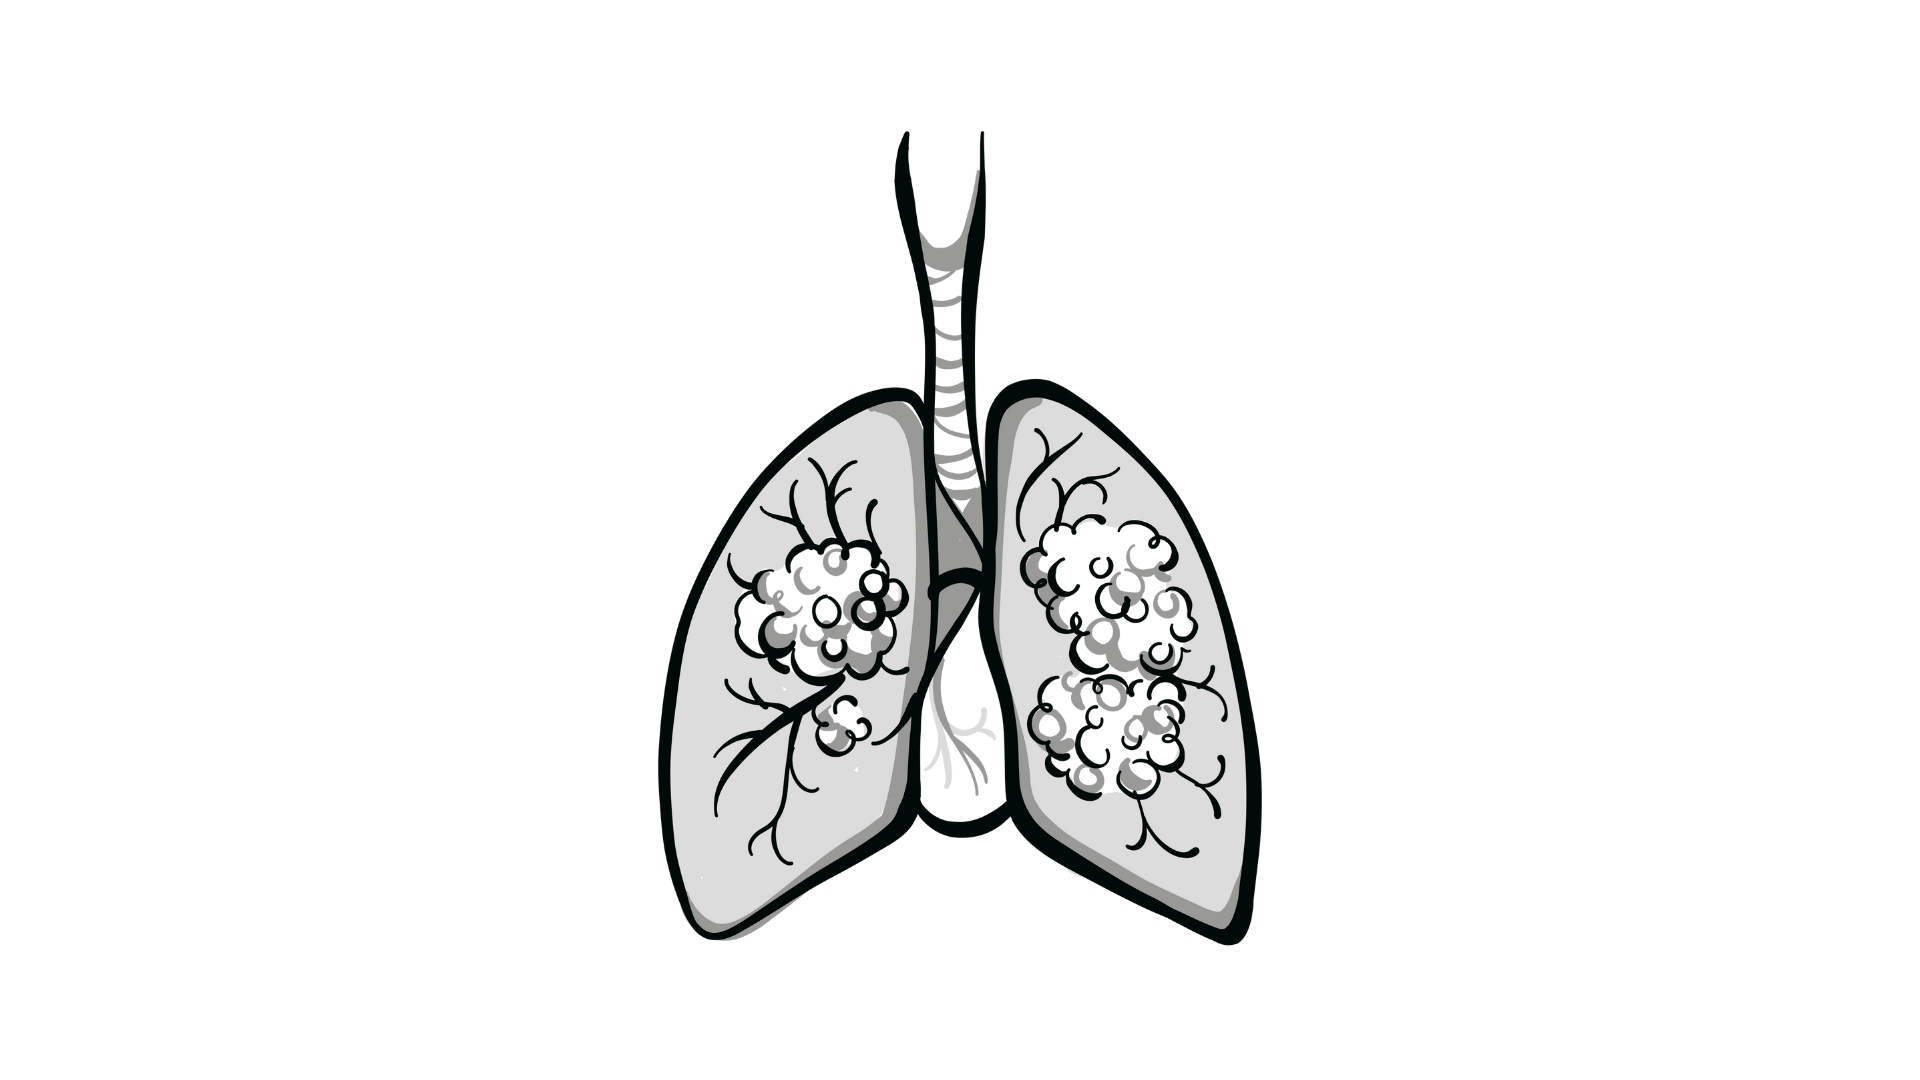 VENTANA PD-L1 Gains CE Label Expansion as CDx for Atezolizumab in NSCLC